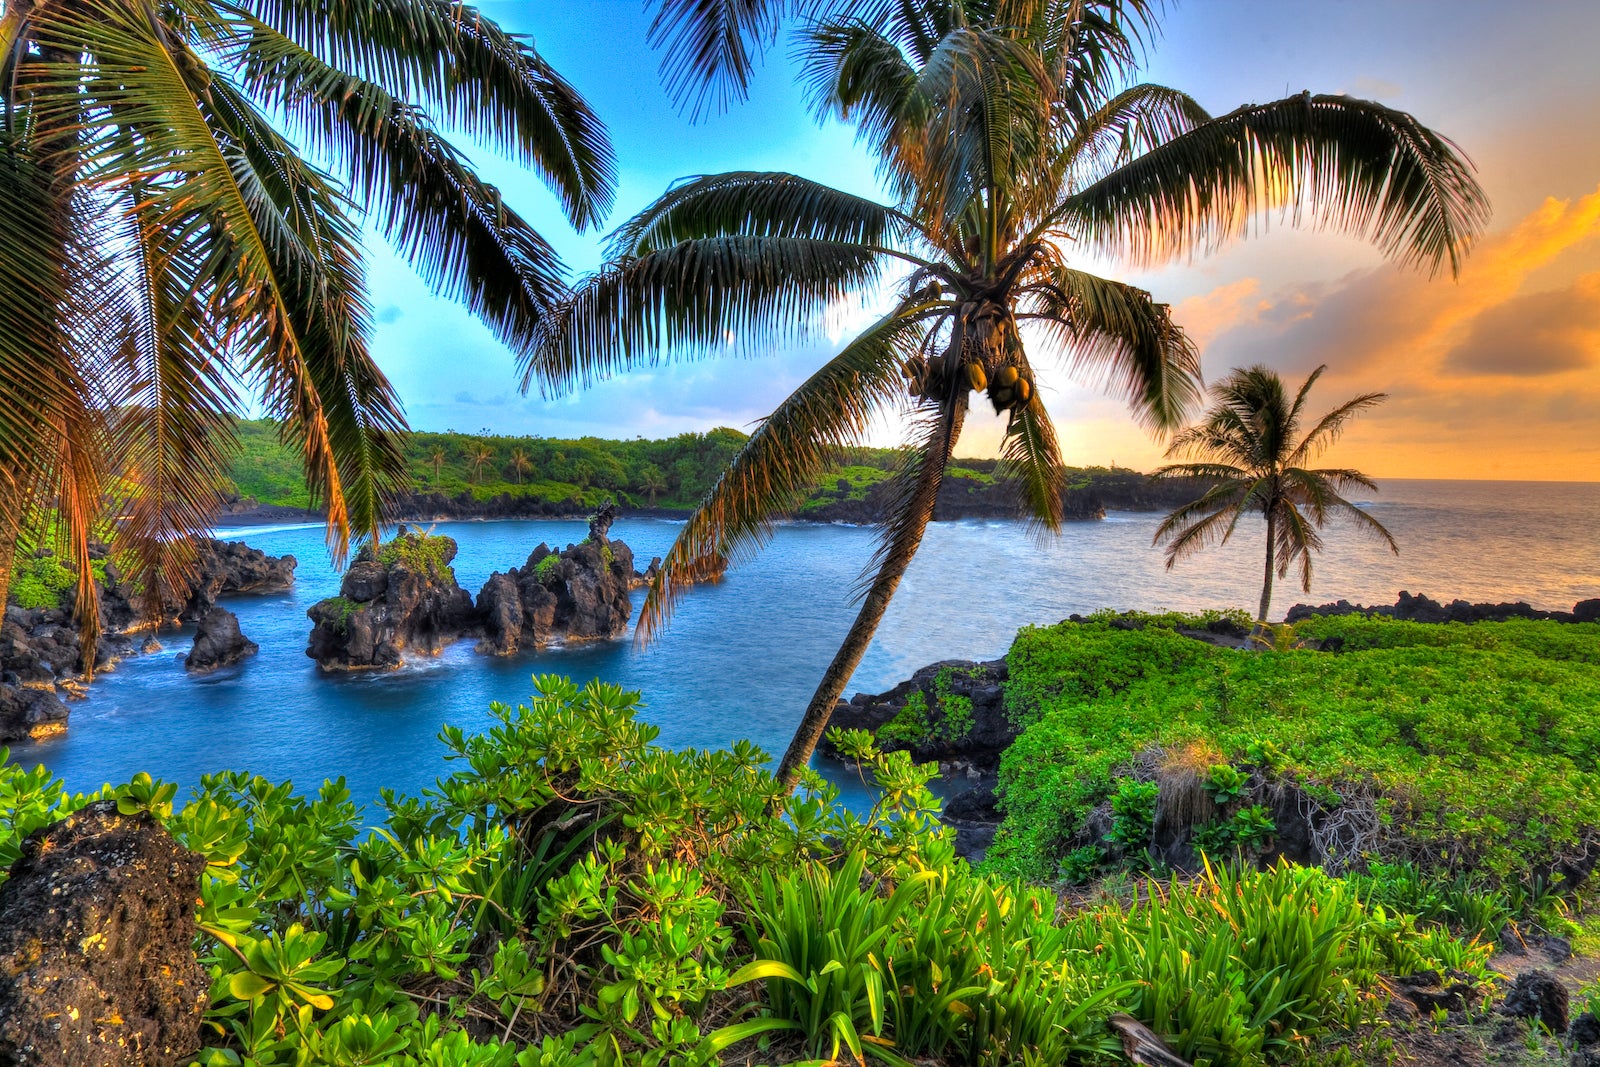 Act fast: Flights to Hawaii for as low as 12,000 miles one-way